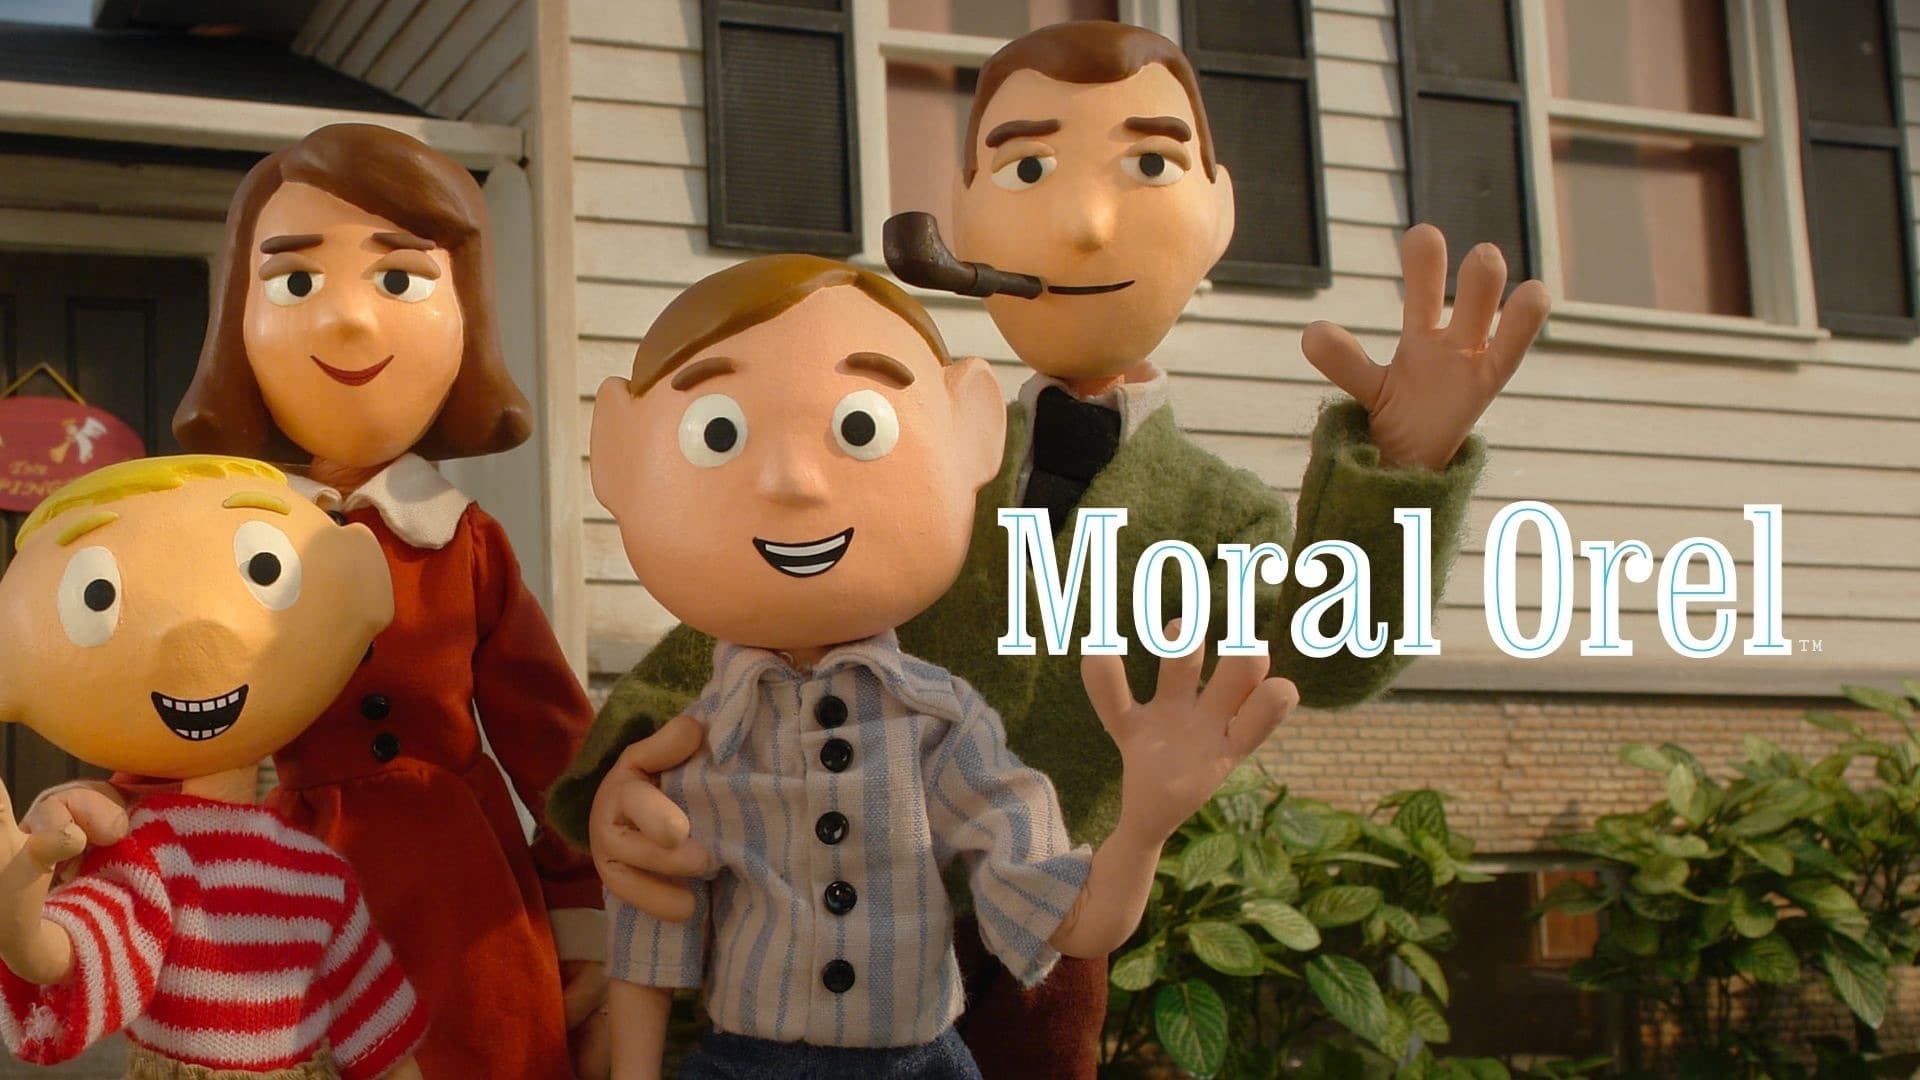 Watch Moral Orel Full Episode Online in HD Quality.